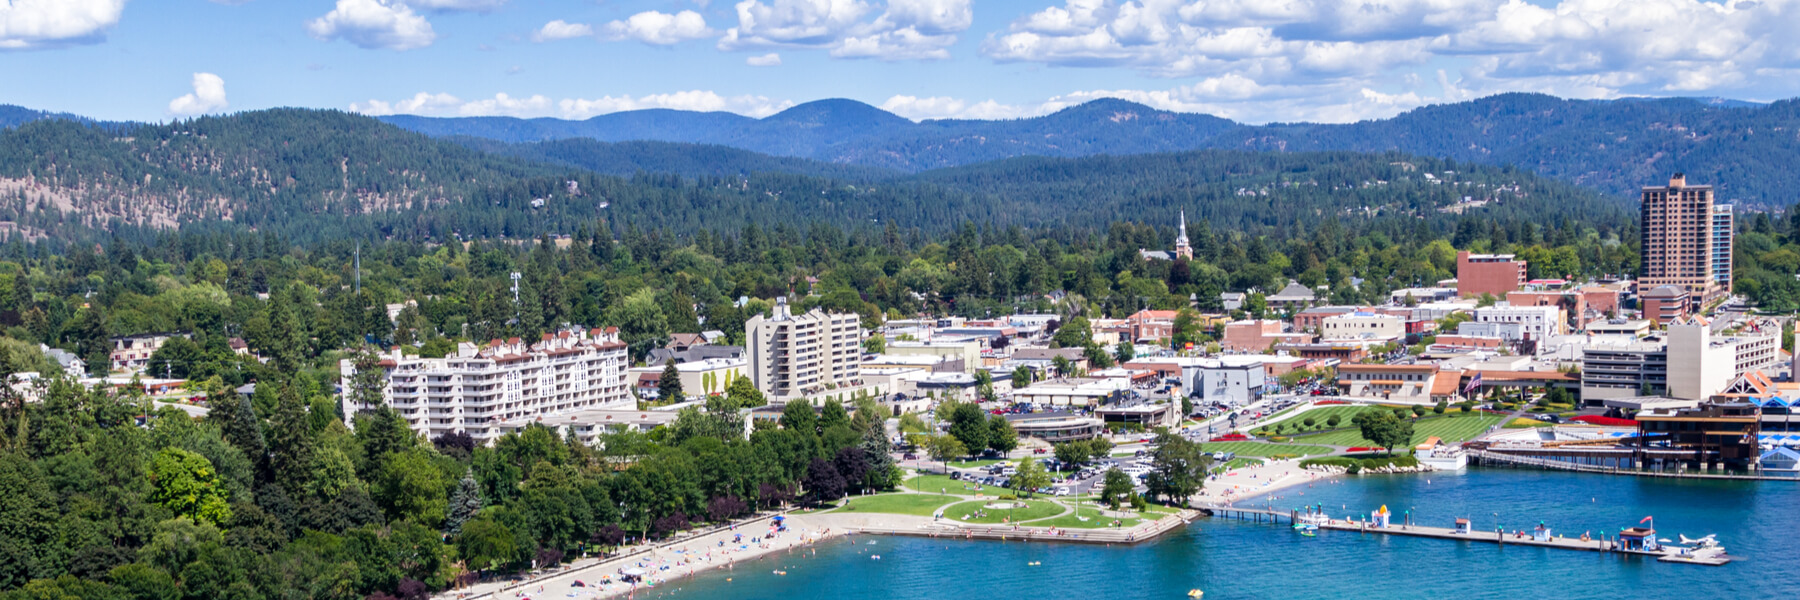 Coeur d'Alene, Idaho aerial view of the city and lake 